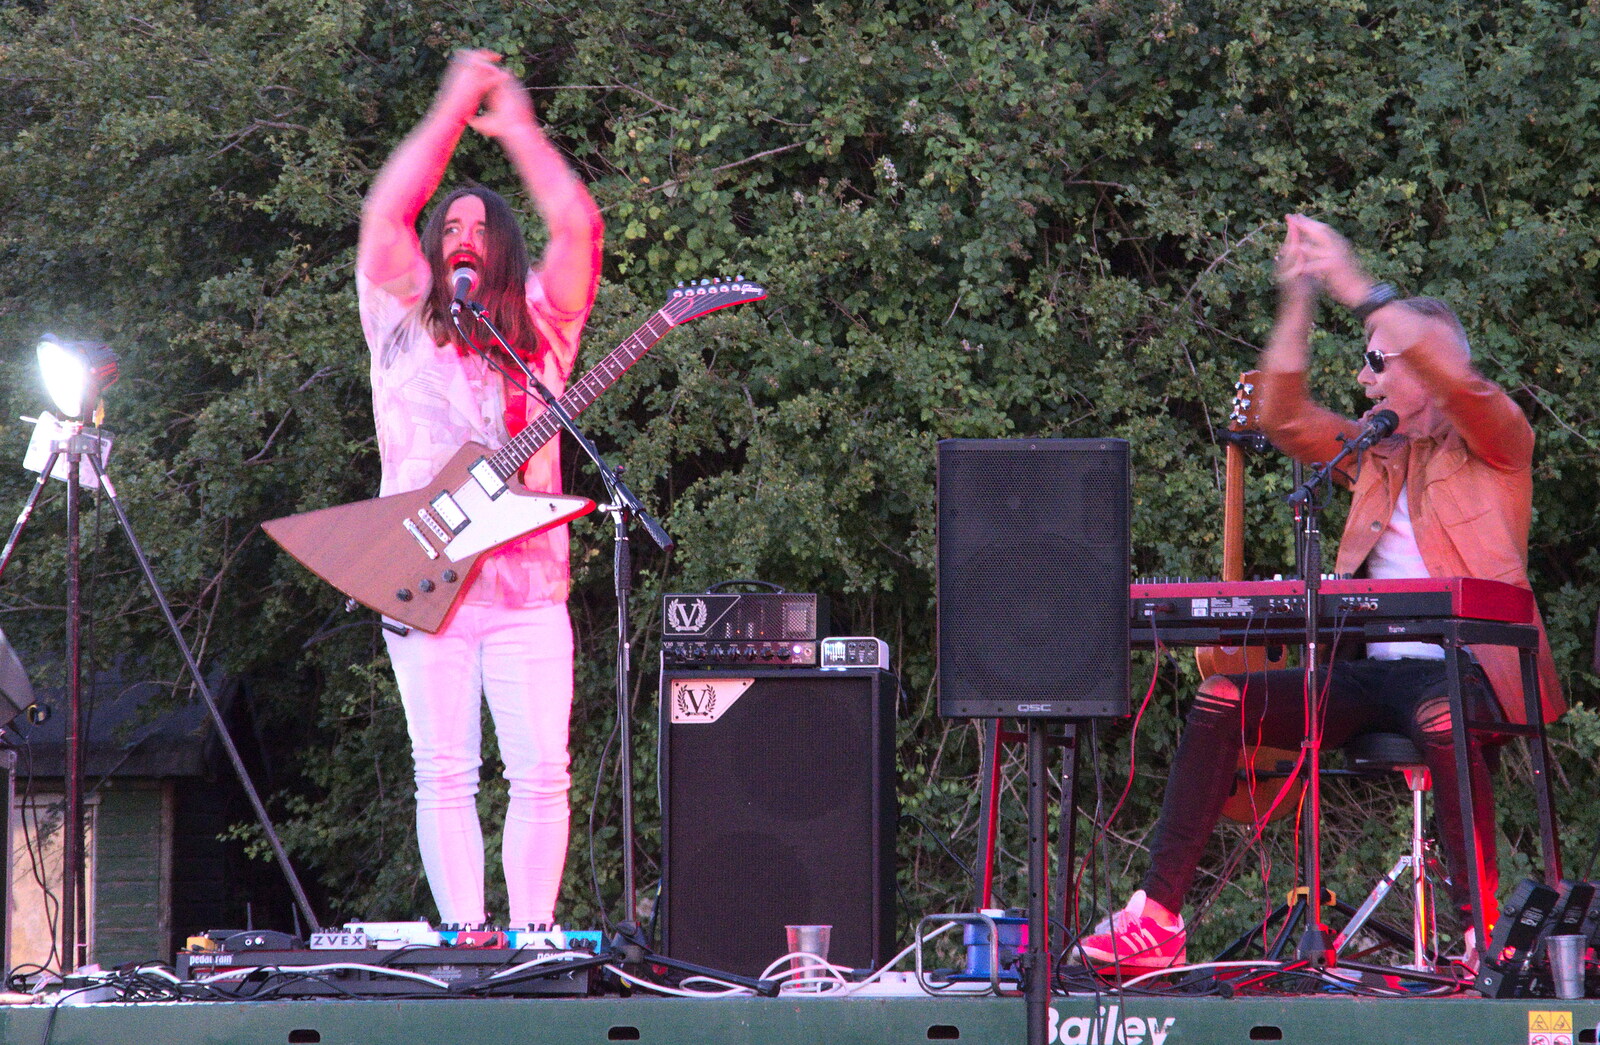 Little Red Kings at Fly High Festival, Seething Airfield, Norfolk - 5th August 2022: There's a hand-clap moment